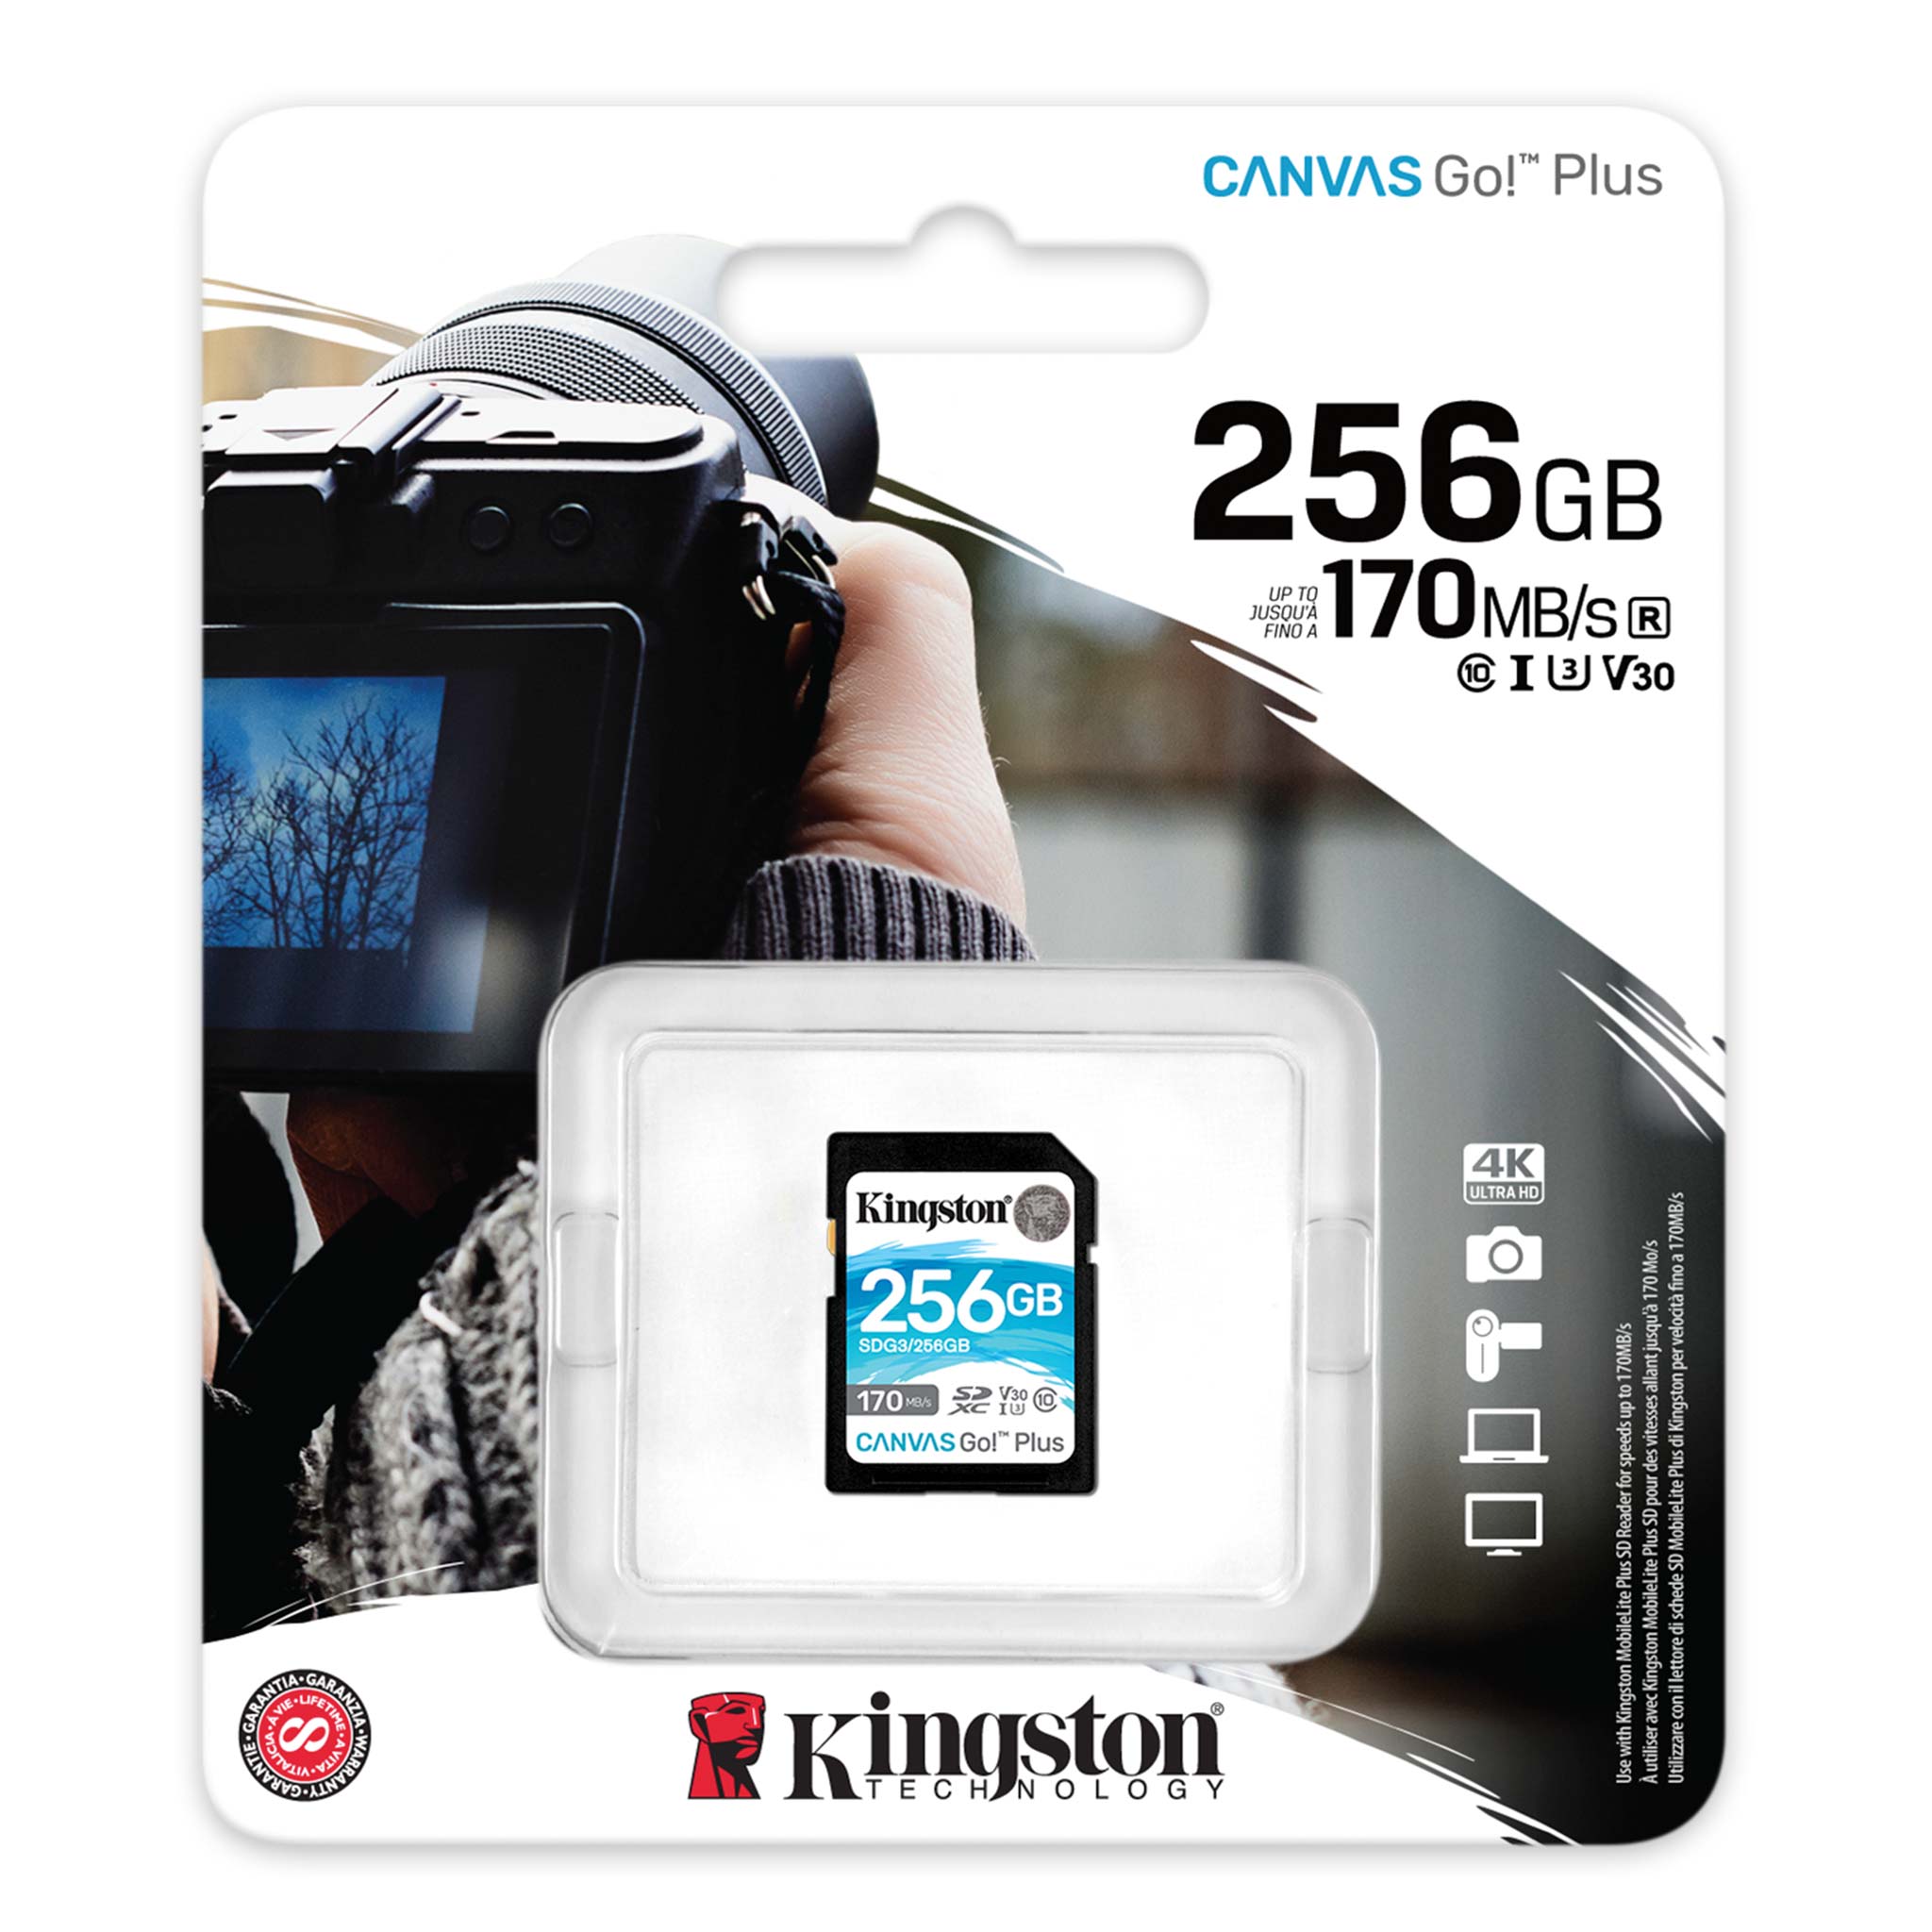 100MBs Works with Kingston Kingston 64GB Zen Mobile Wow MicroSDXC Canvas Select Plus Card Verified by SanFlash. 